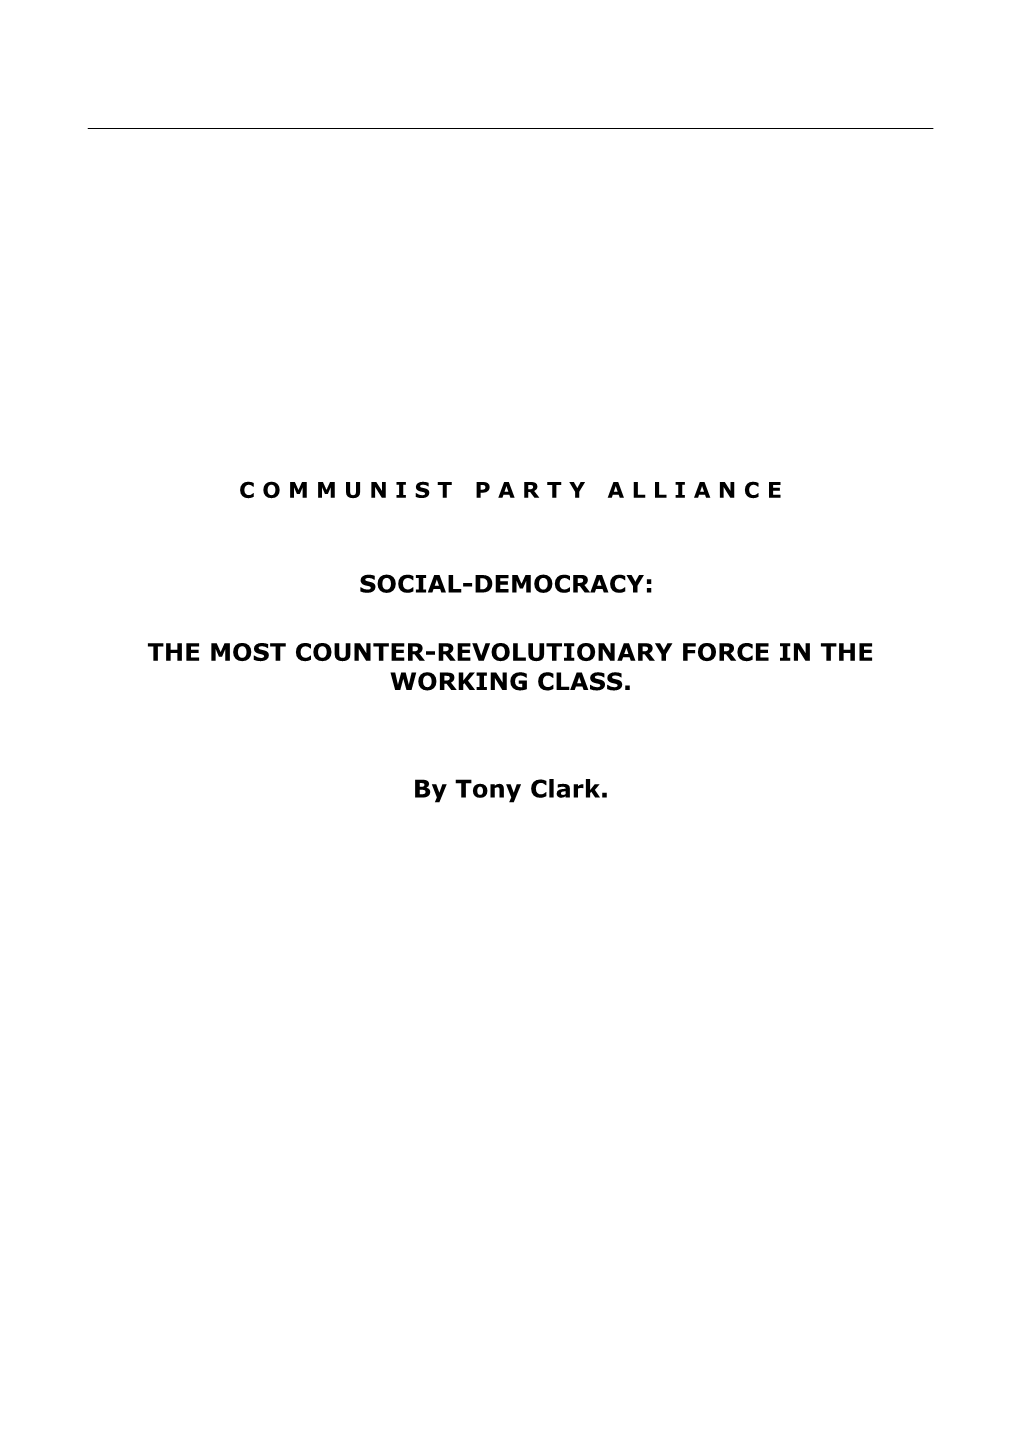 Social Democracy: the Most Counter-Revolutionary Force